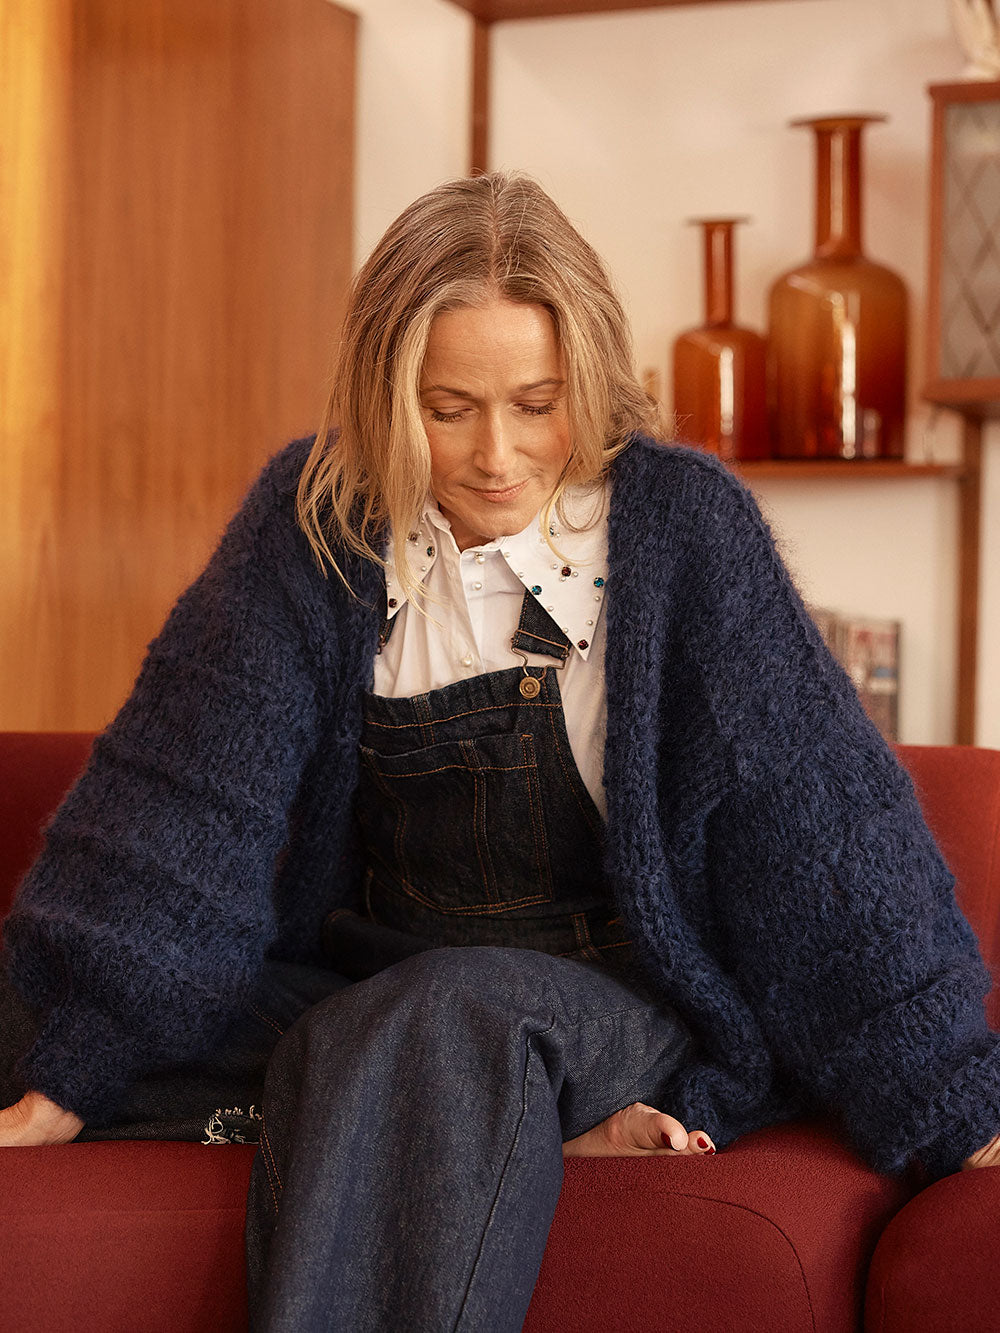 Woman sits on red couch, she is smiling at the camera and wearing a navy blue knitted mohair cardigan and denim overalls with a white collared shirt.